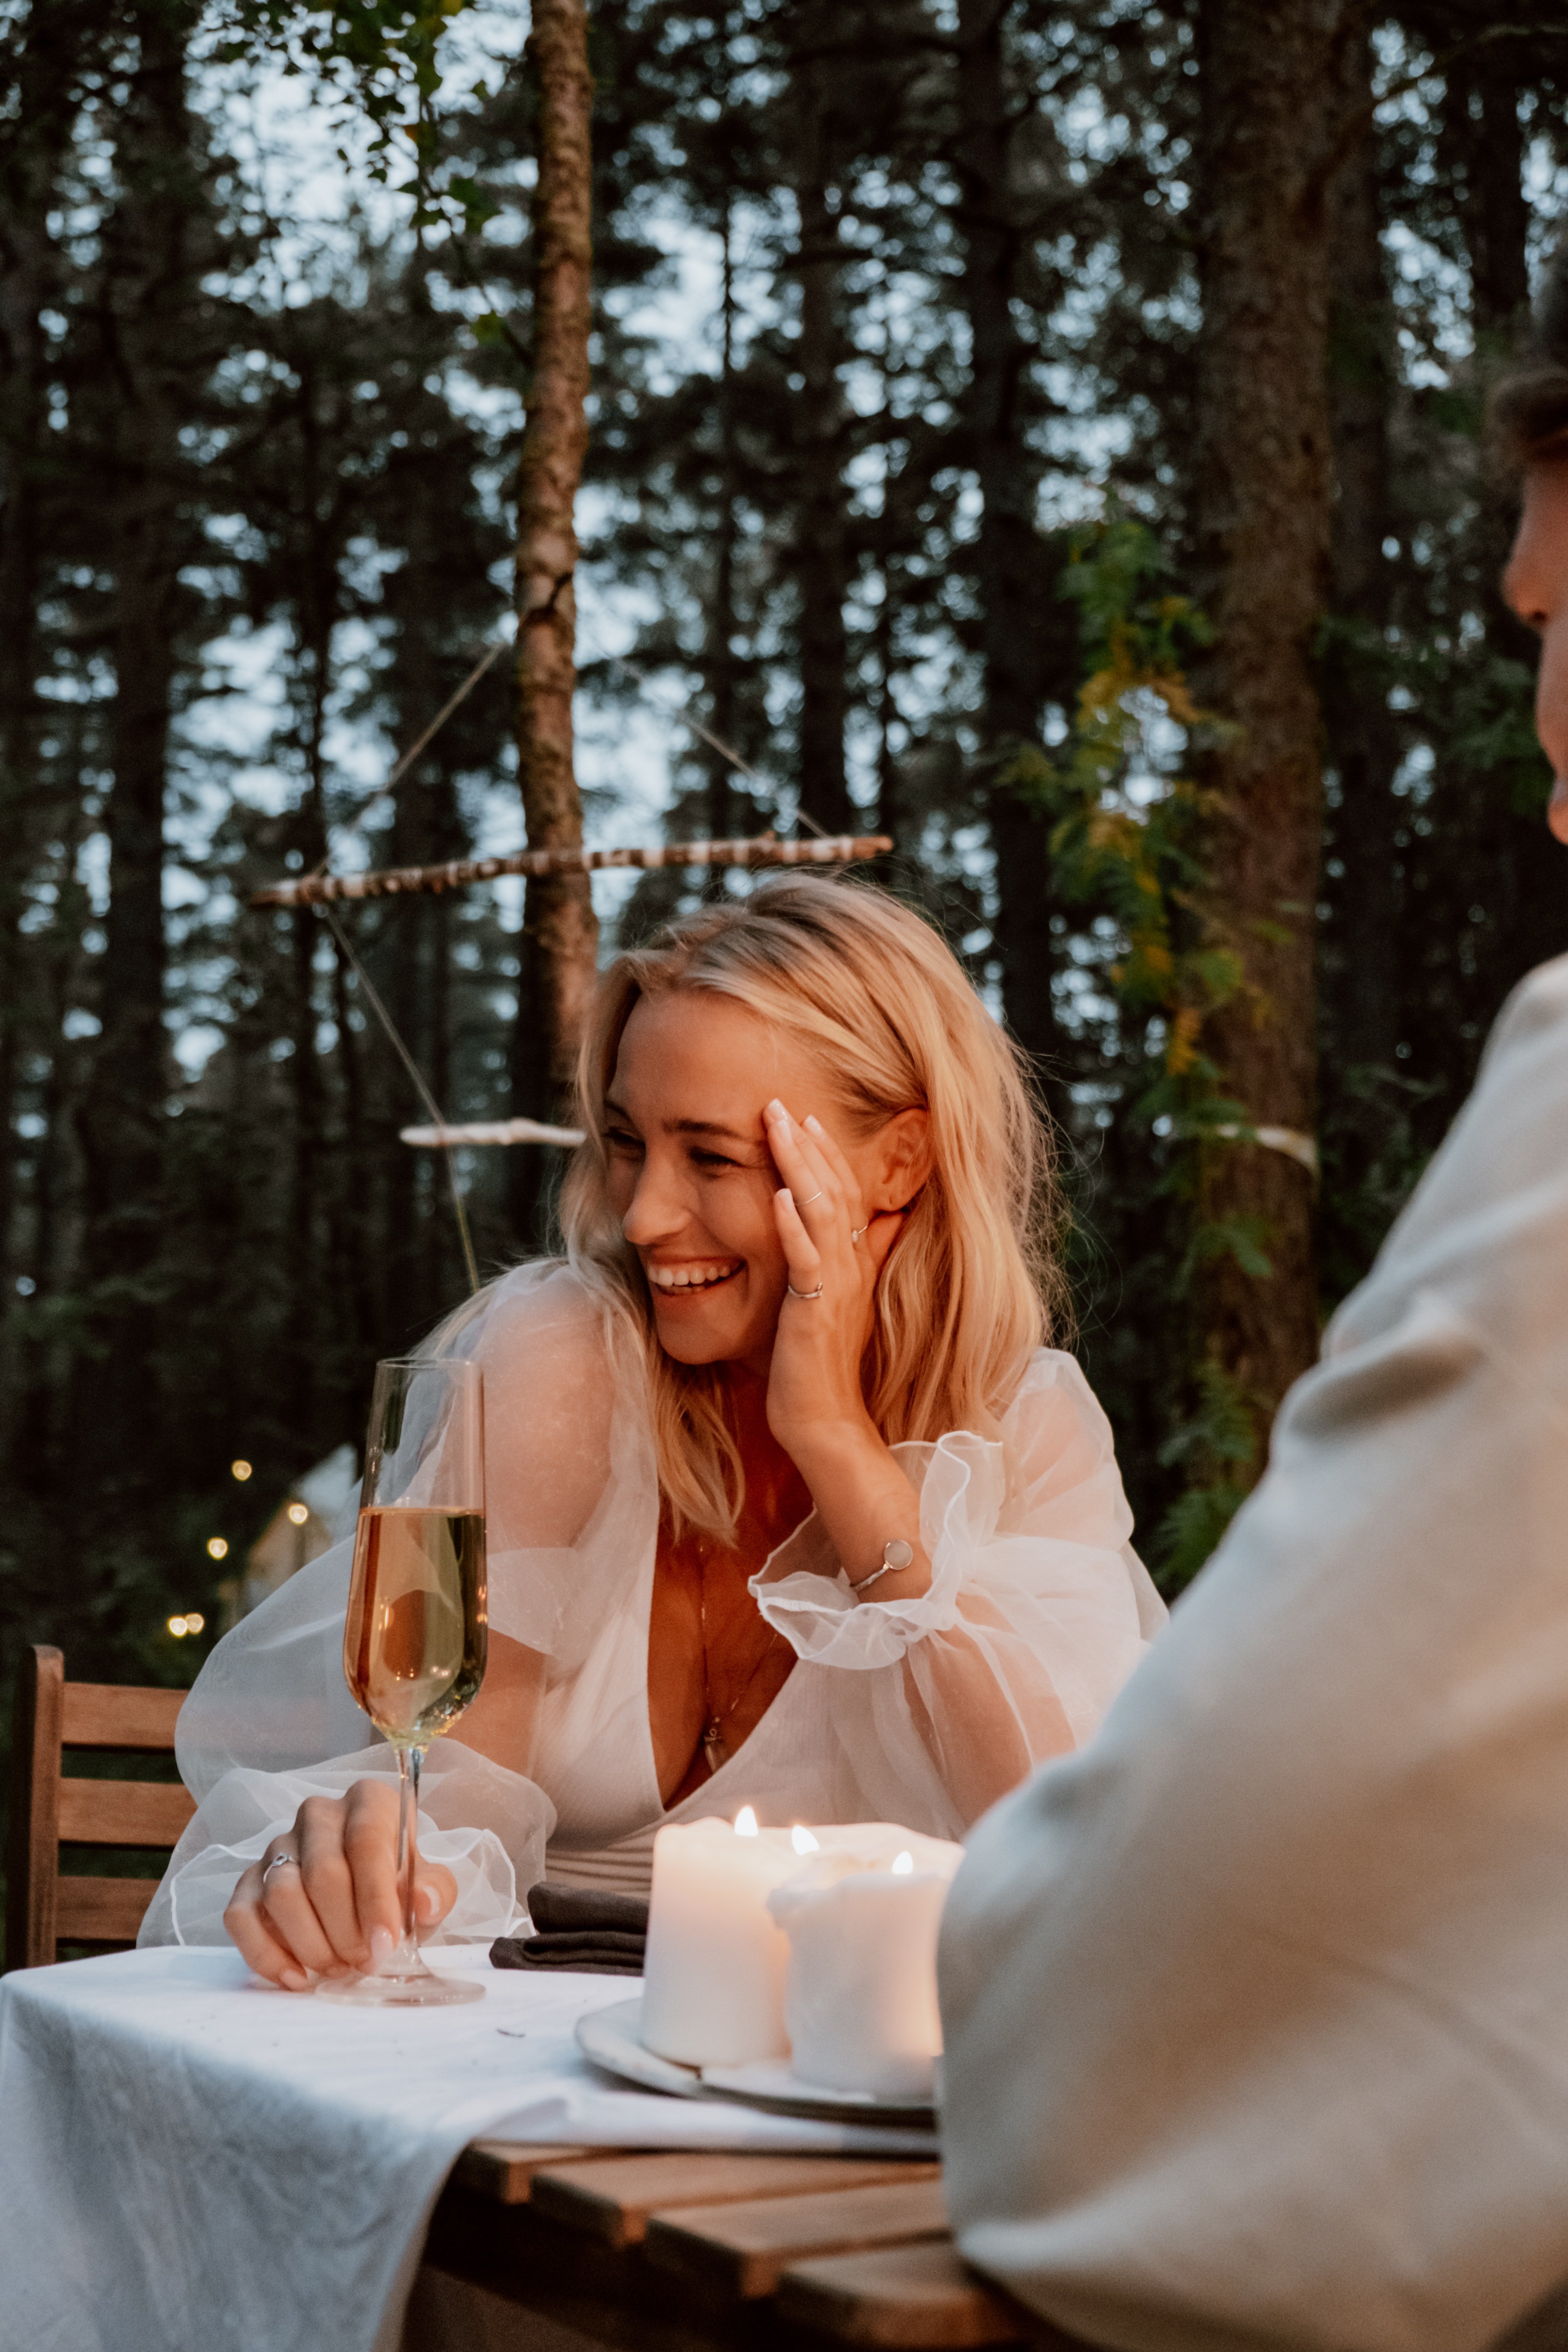 Jacob had the courage to ask Cynthia out on a date. | Source: Pexels